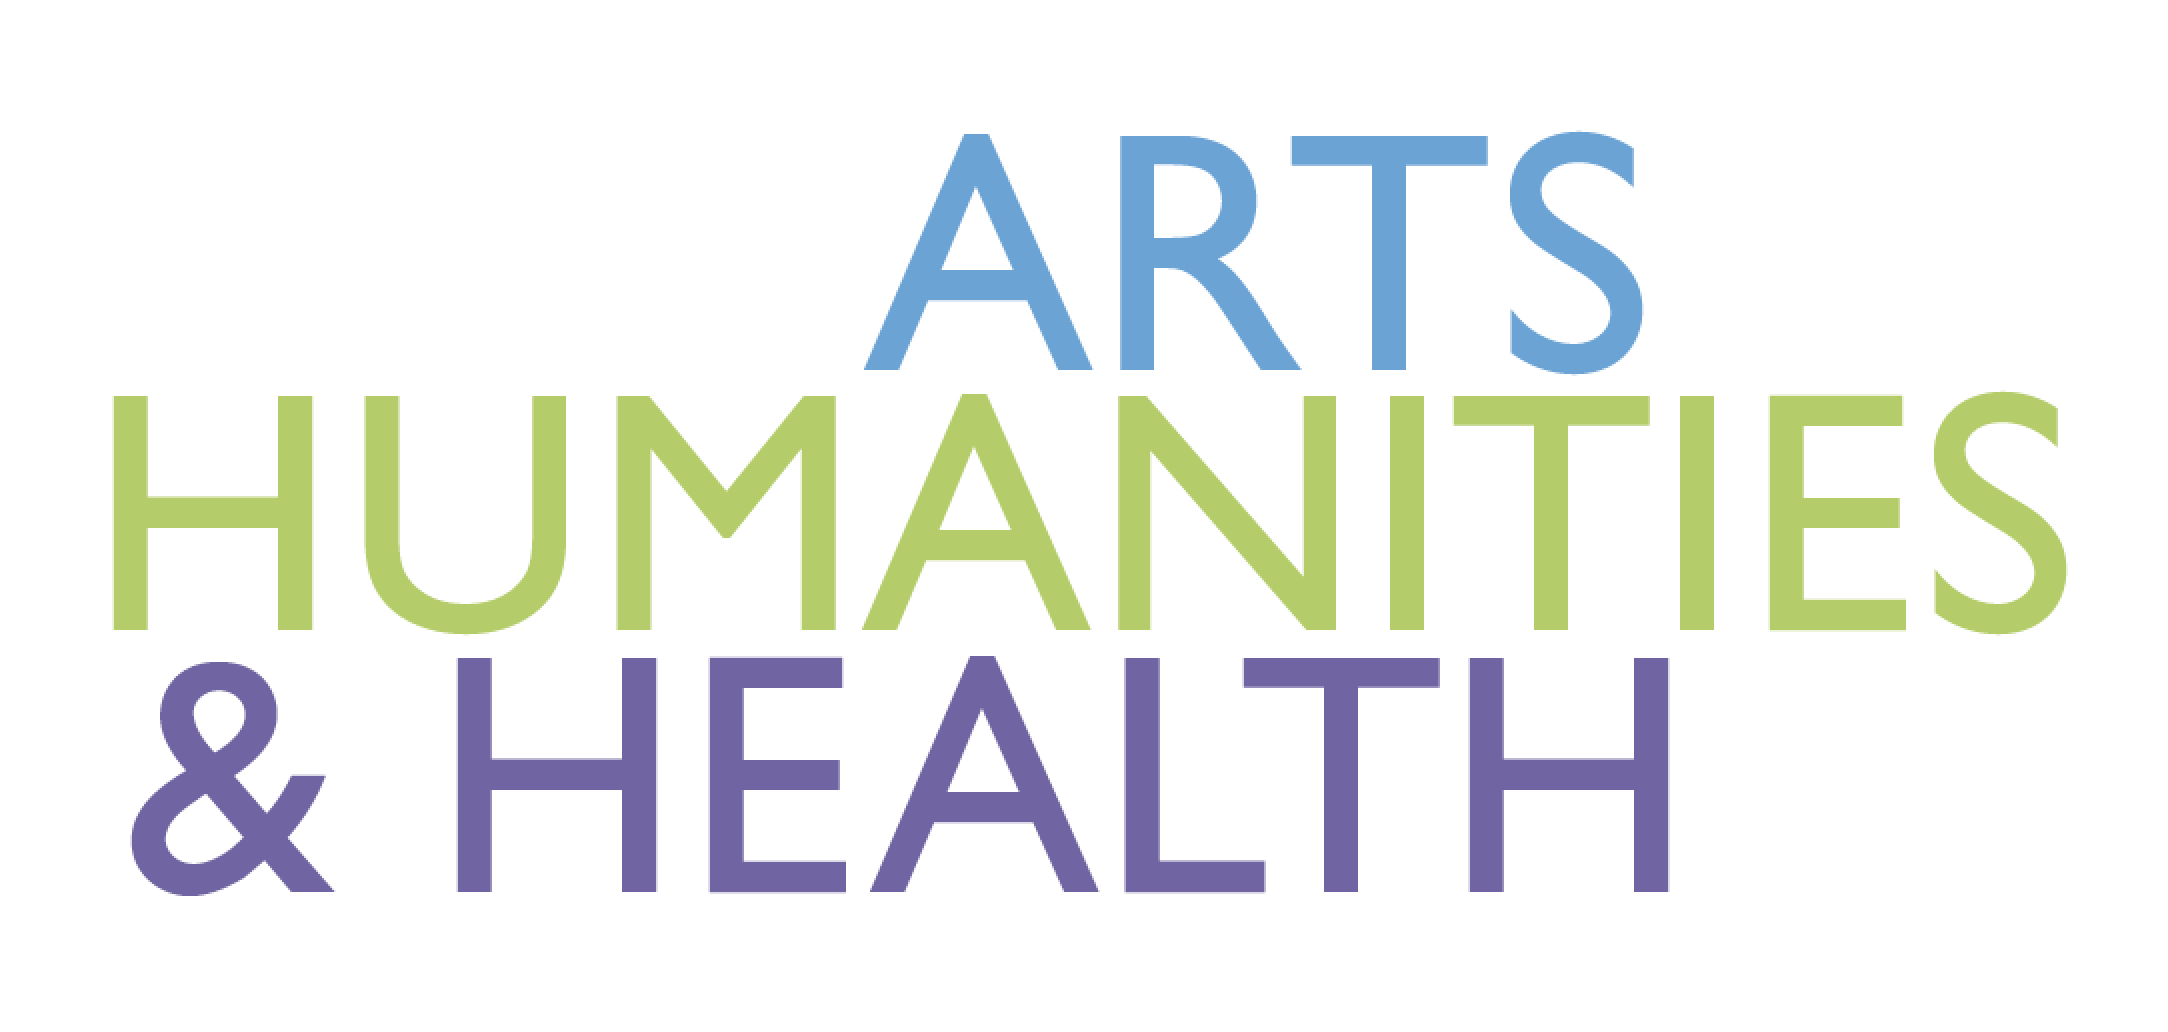 Johns Hopkins Center for Medical Humanities & Social Medicine Program in the Arts, Humanities, and Health Logo